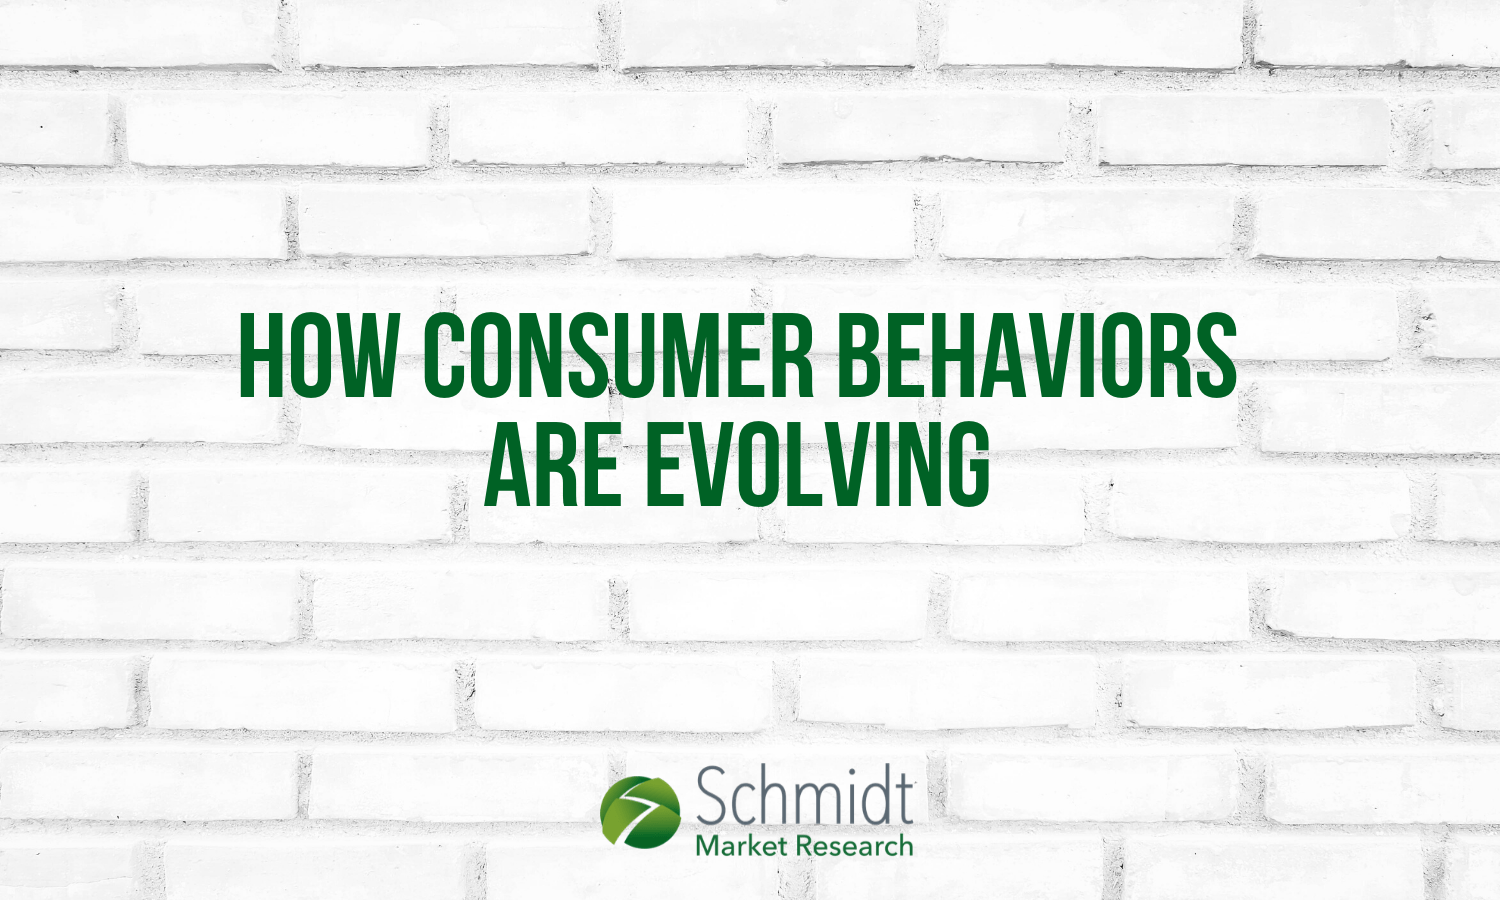 Banking During COVID-19, How Consumer Behaviors Are Evolving